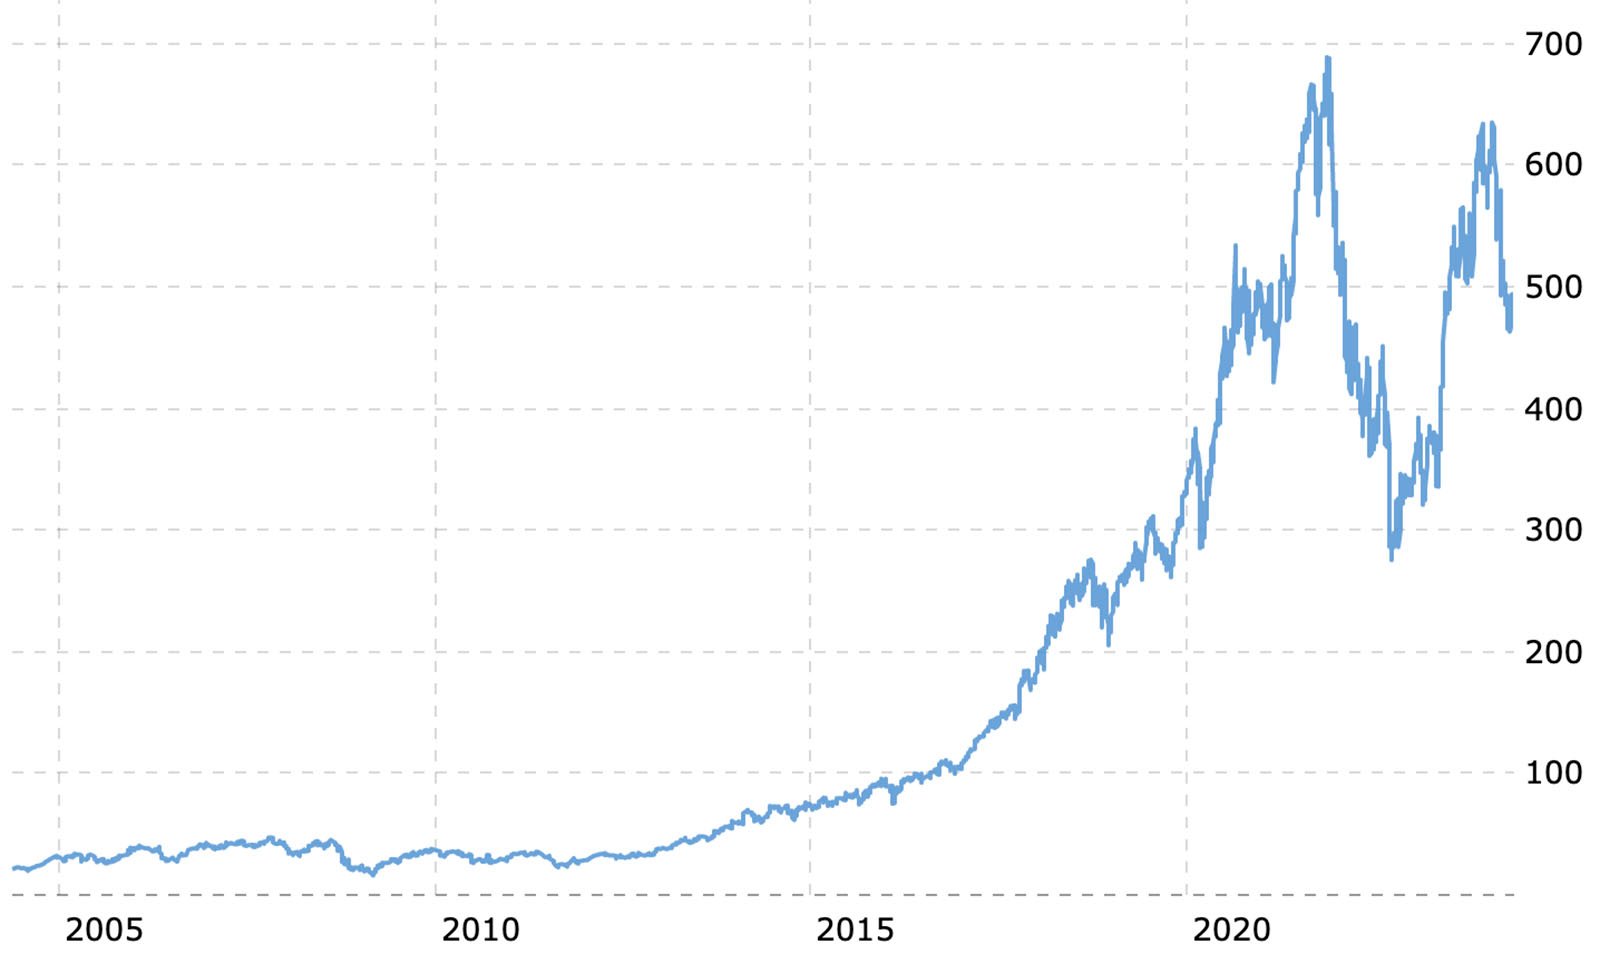 A line graph showing stock price trends from 2005 to 2023. The graph starts lower, shows steady growth until around 2013, then spikes sharply upward, reaching a peak around 2021, followed by a noticeable fluctuation and dip in the prices after.